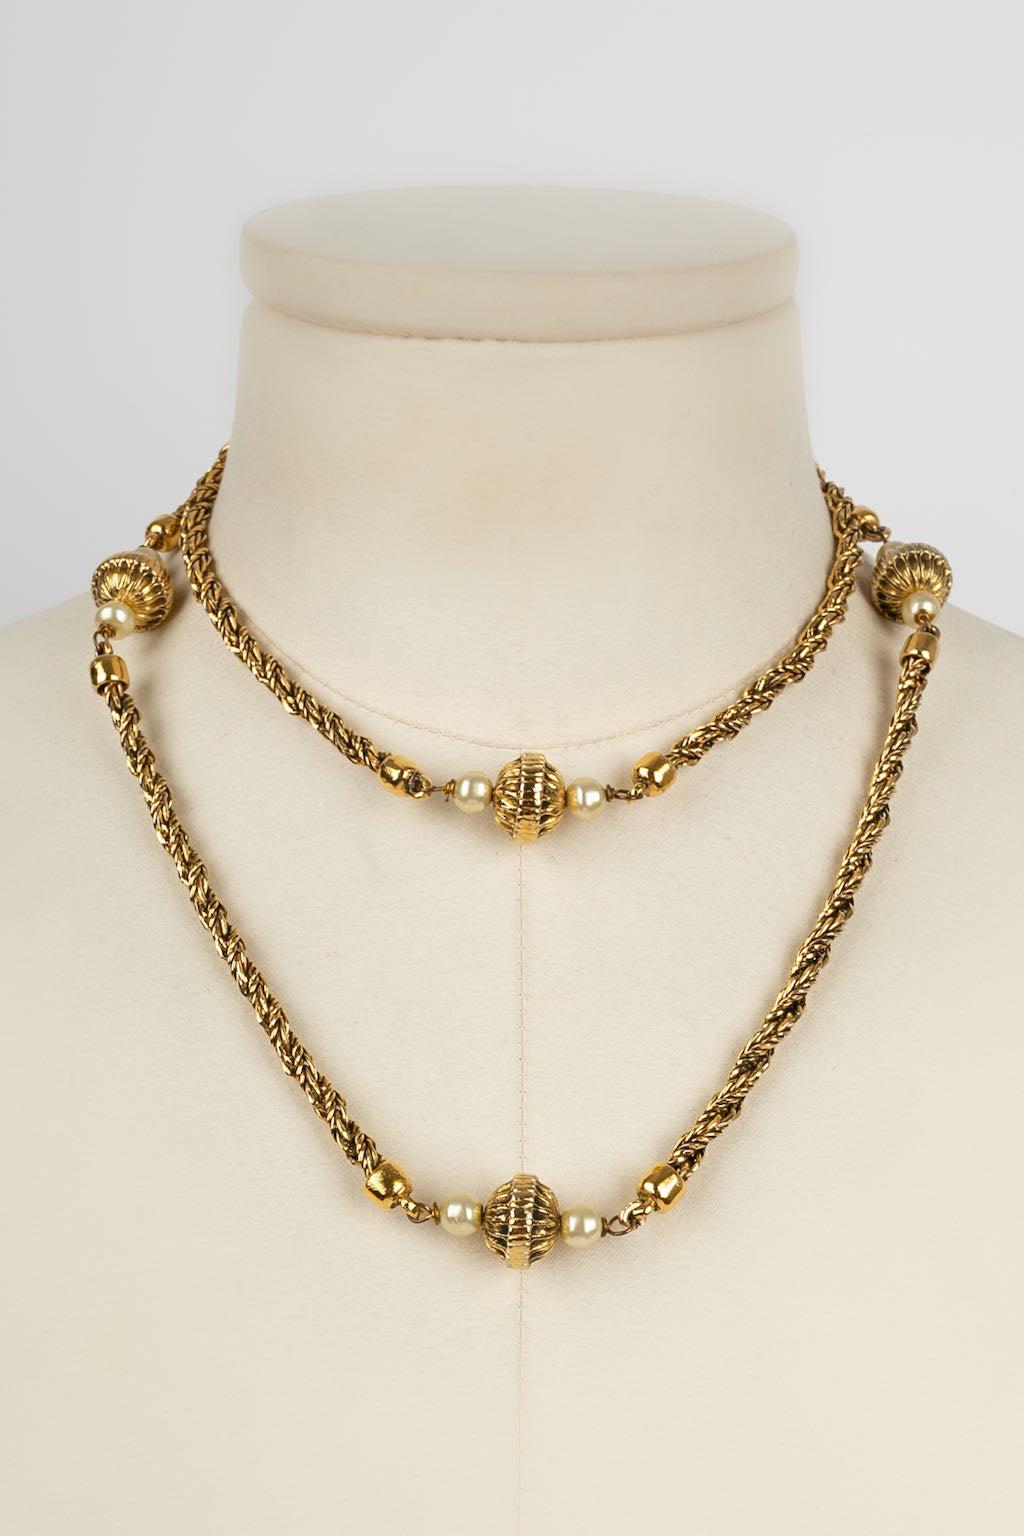 Women's Chanel Long Necklace in Gilded Metal with Pearly Pearls For Sale